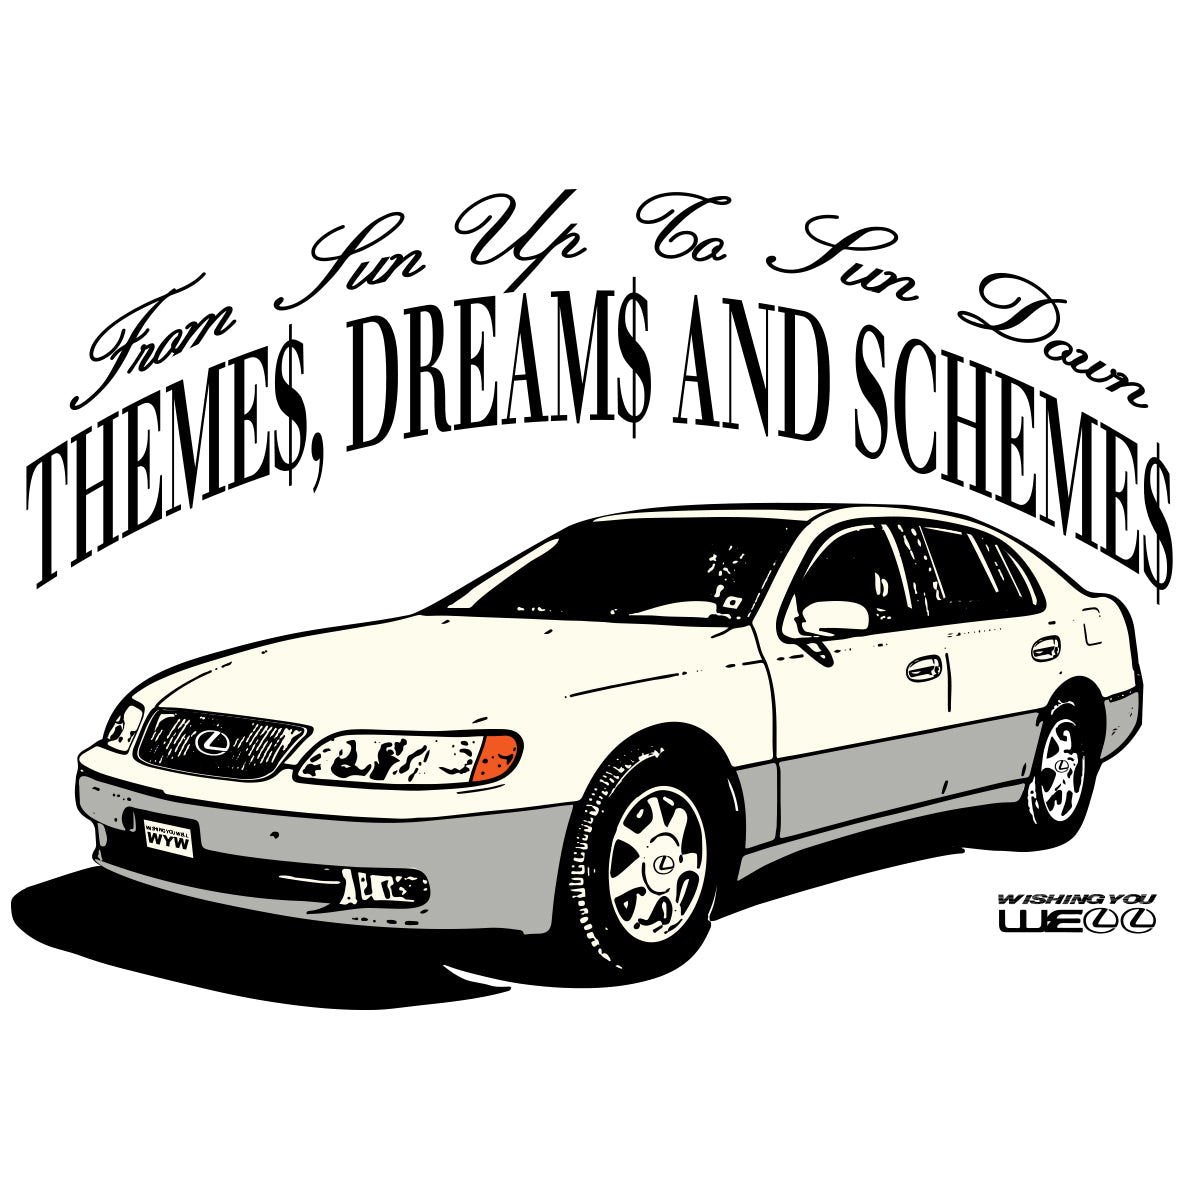 THEMES, DREAMS AND SCHEMES (93' LEXUS GS 300 REVERSE TEE/WHITE GD)